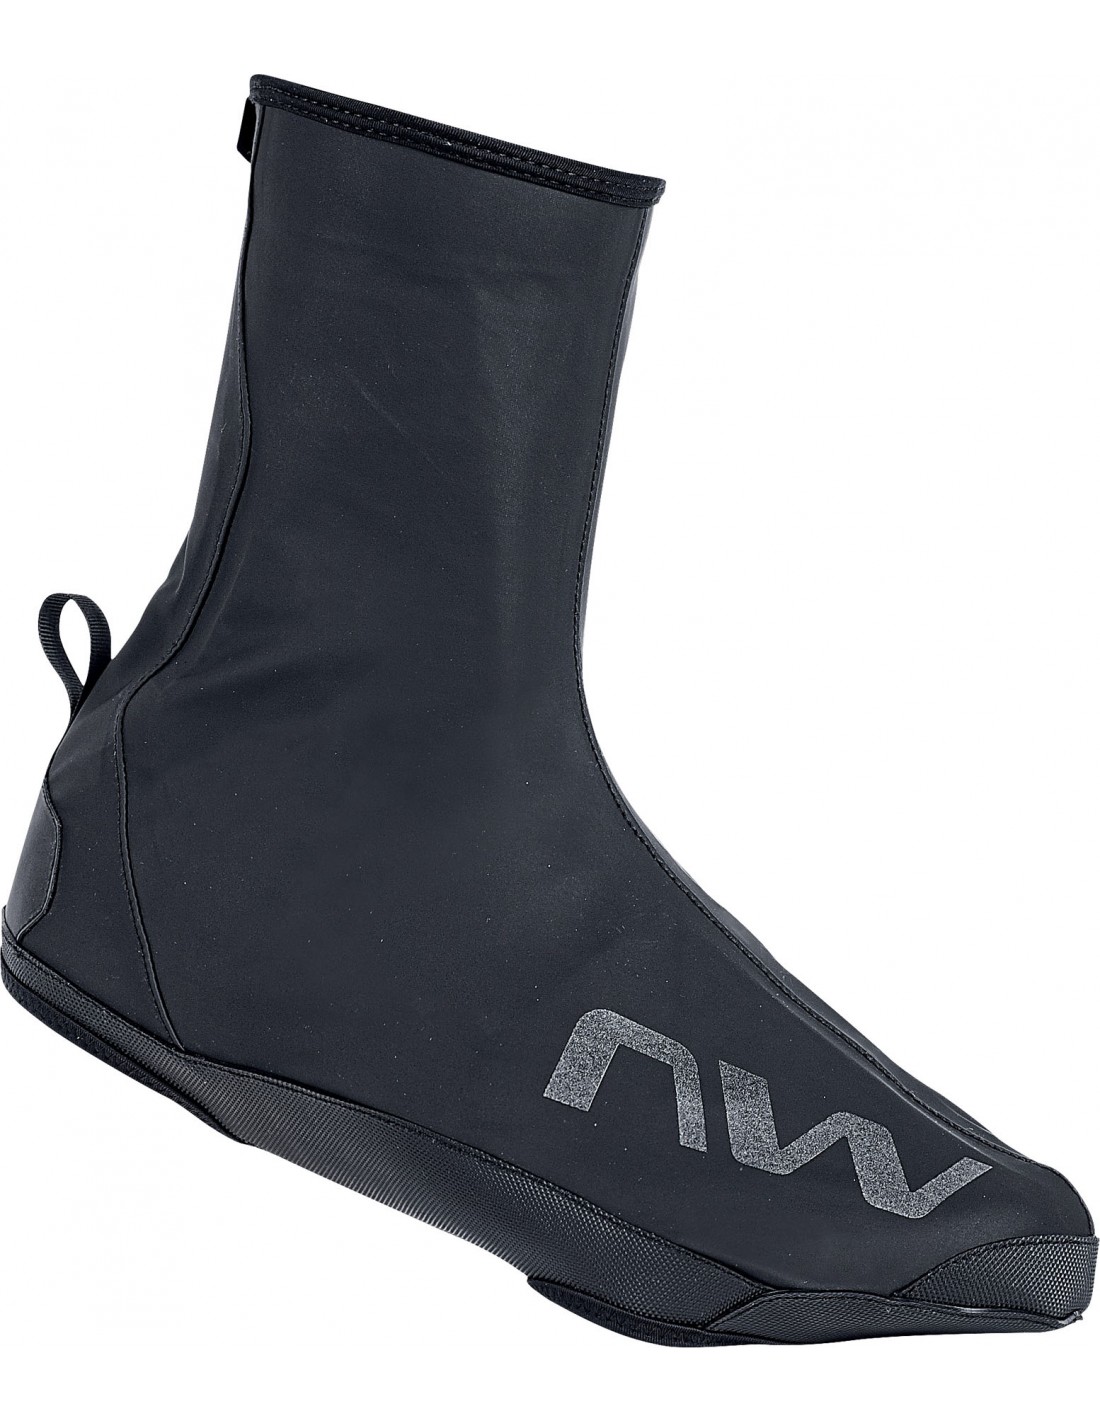 Northwave H2O Shoecover Yellow Fluorescent M 